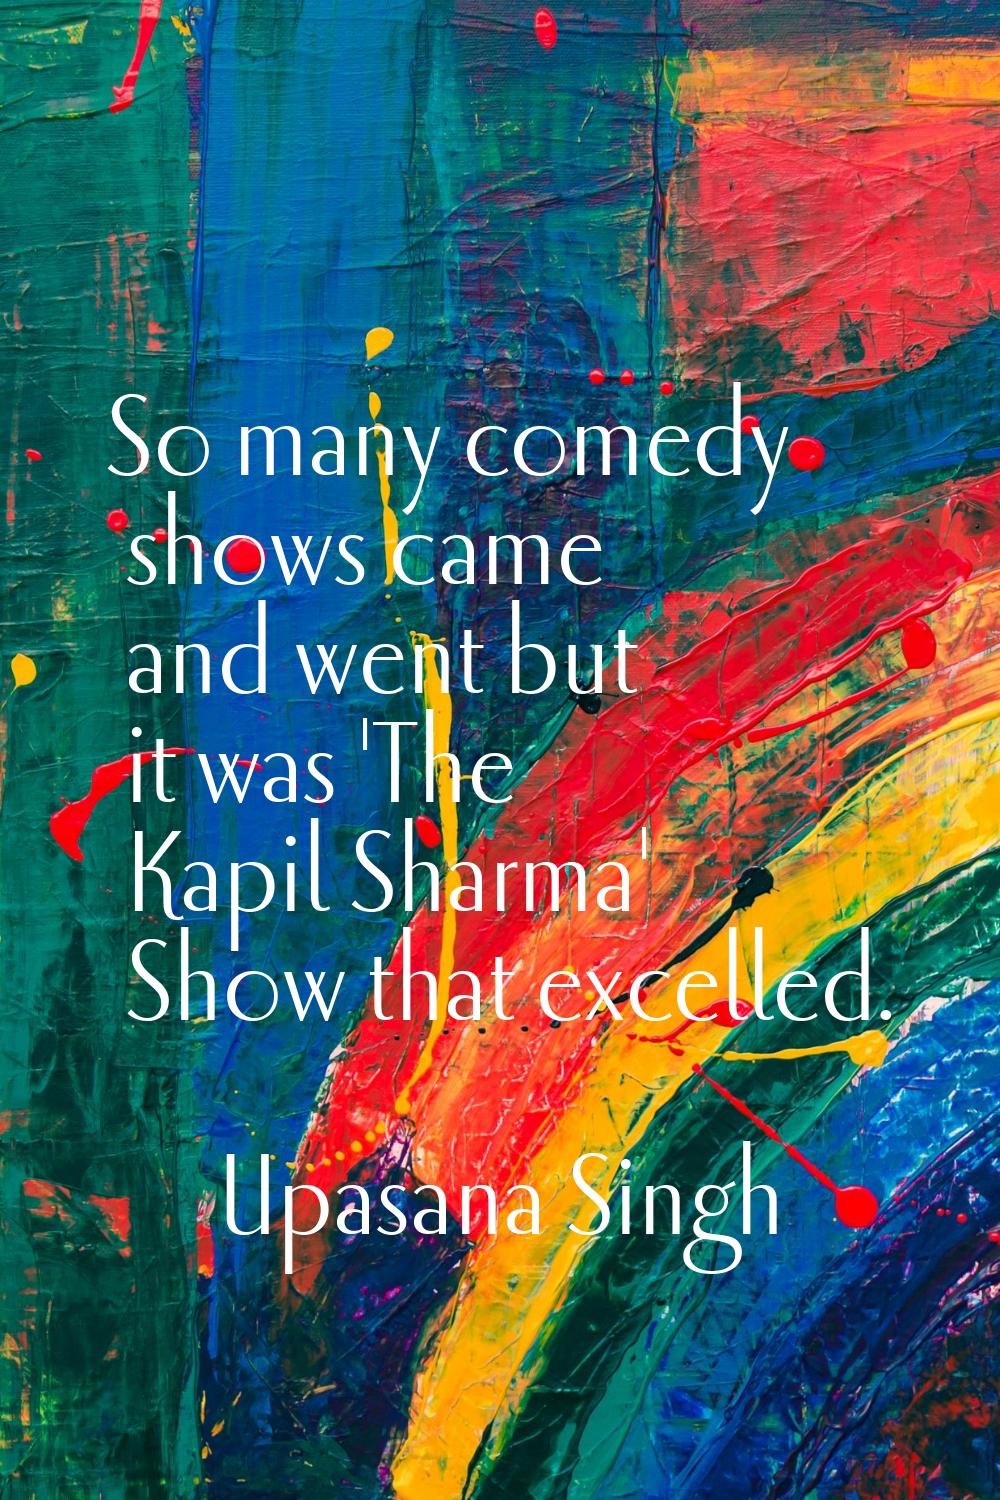 So many comedy shows came and went but it was 'The Kapil Sharma' Show that excelled.